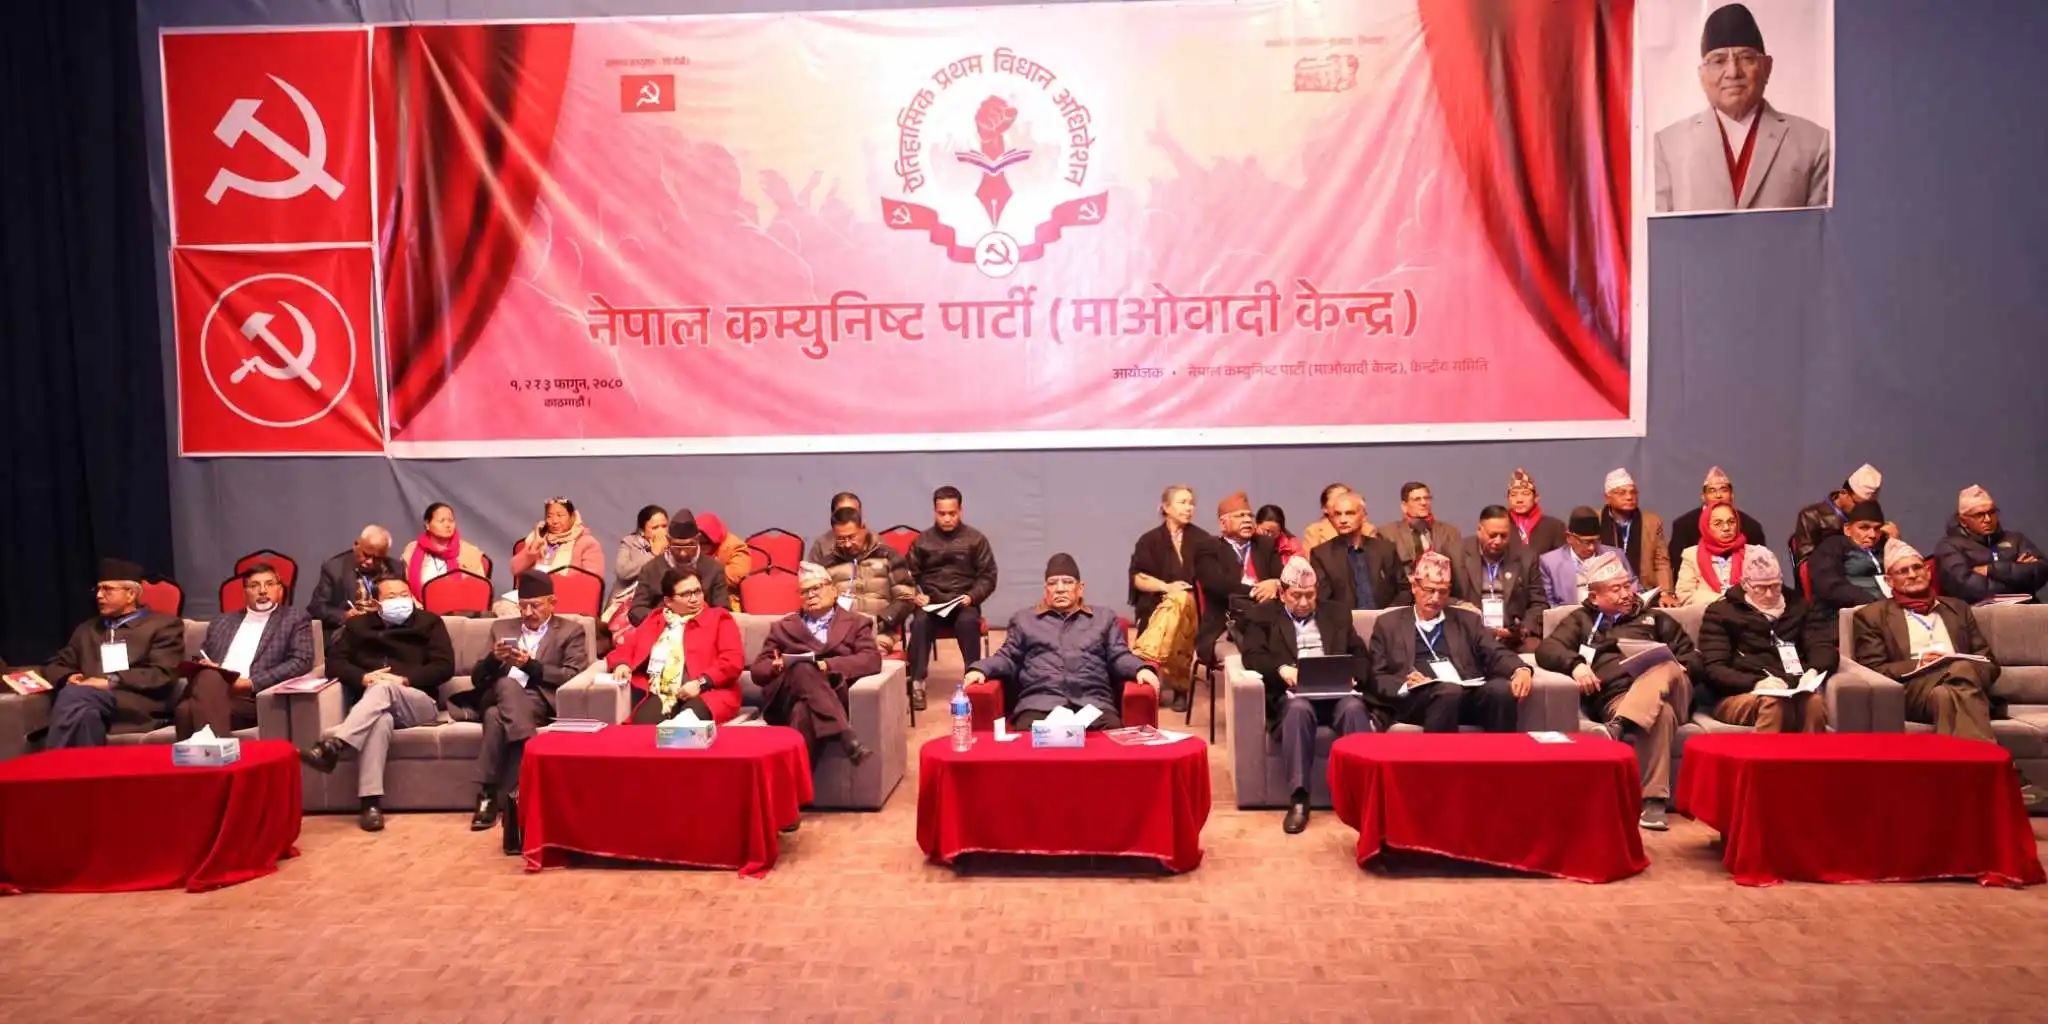 Majority leaders opt for direct elections and inclusive representation in Maoist Center